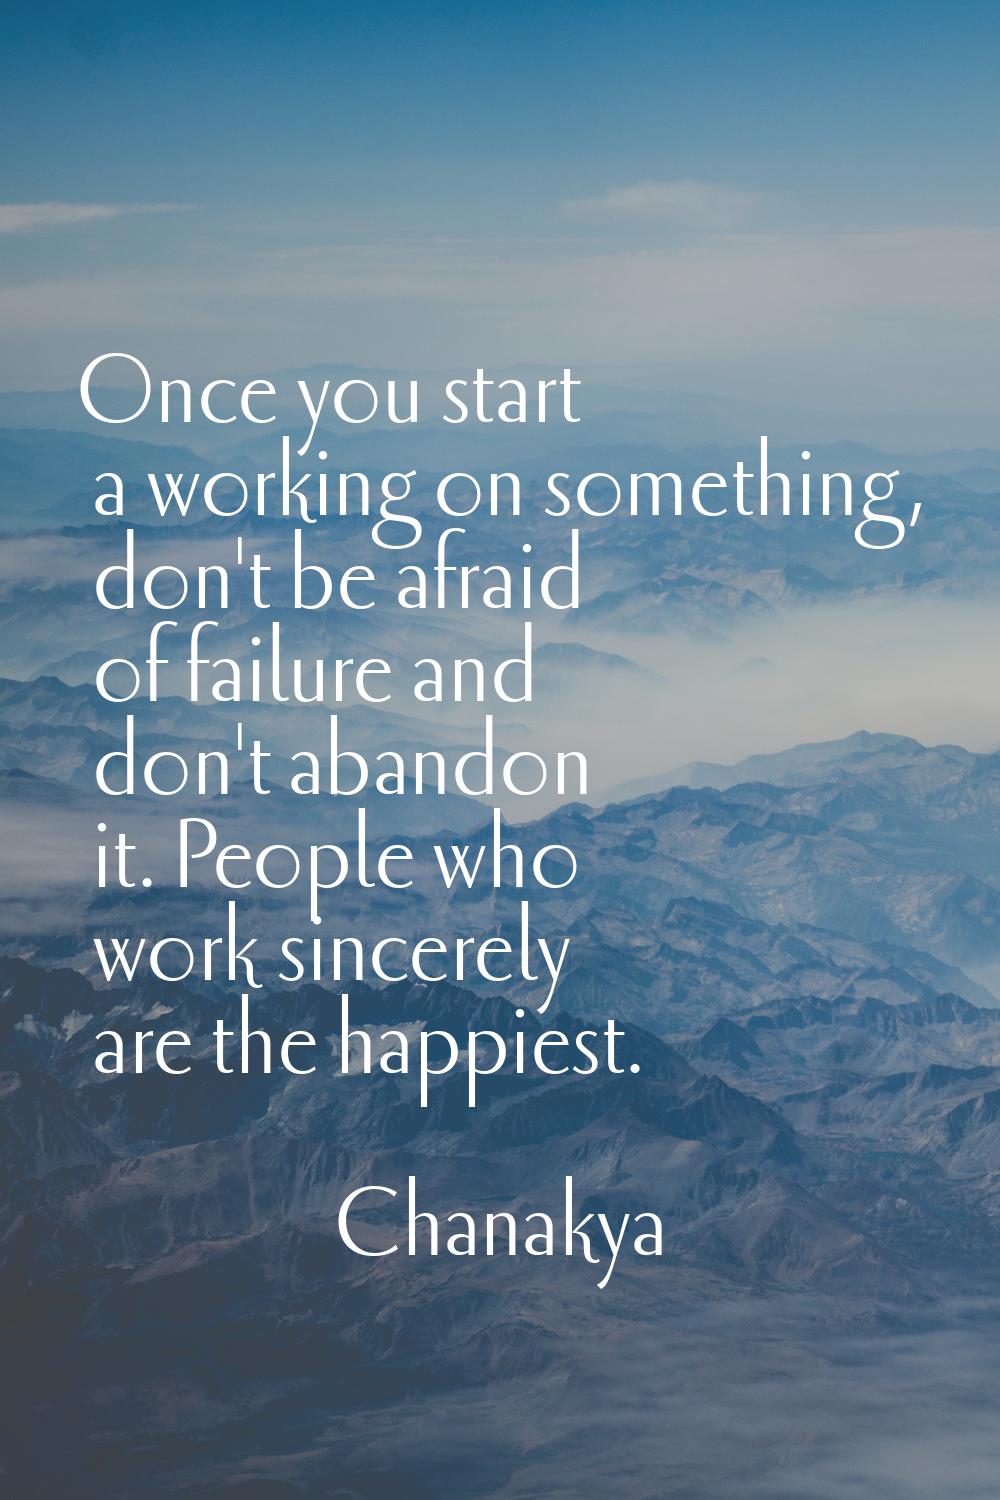 Once you start a working on something, don't be afraid of failure and don't abandon it. People who 